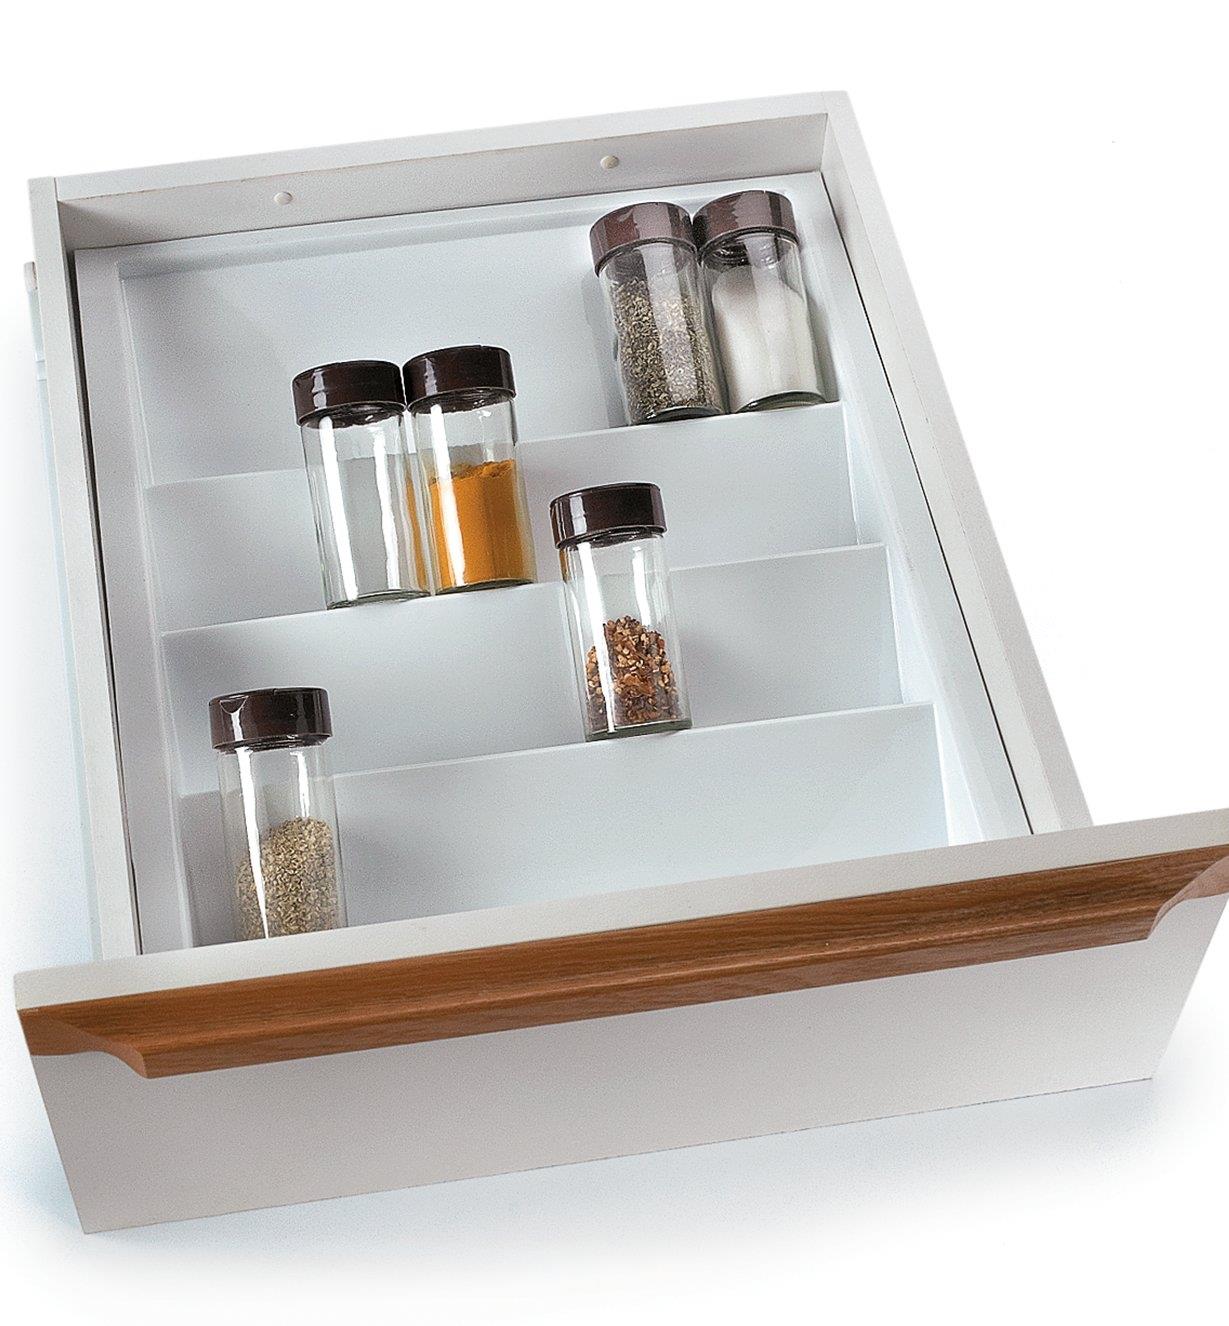 Small Spice Tray in a drawer, holding spice bottles